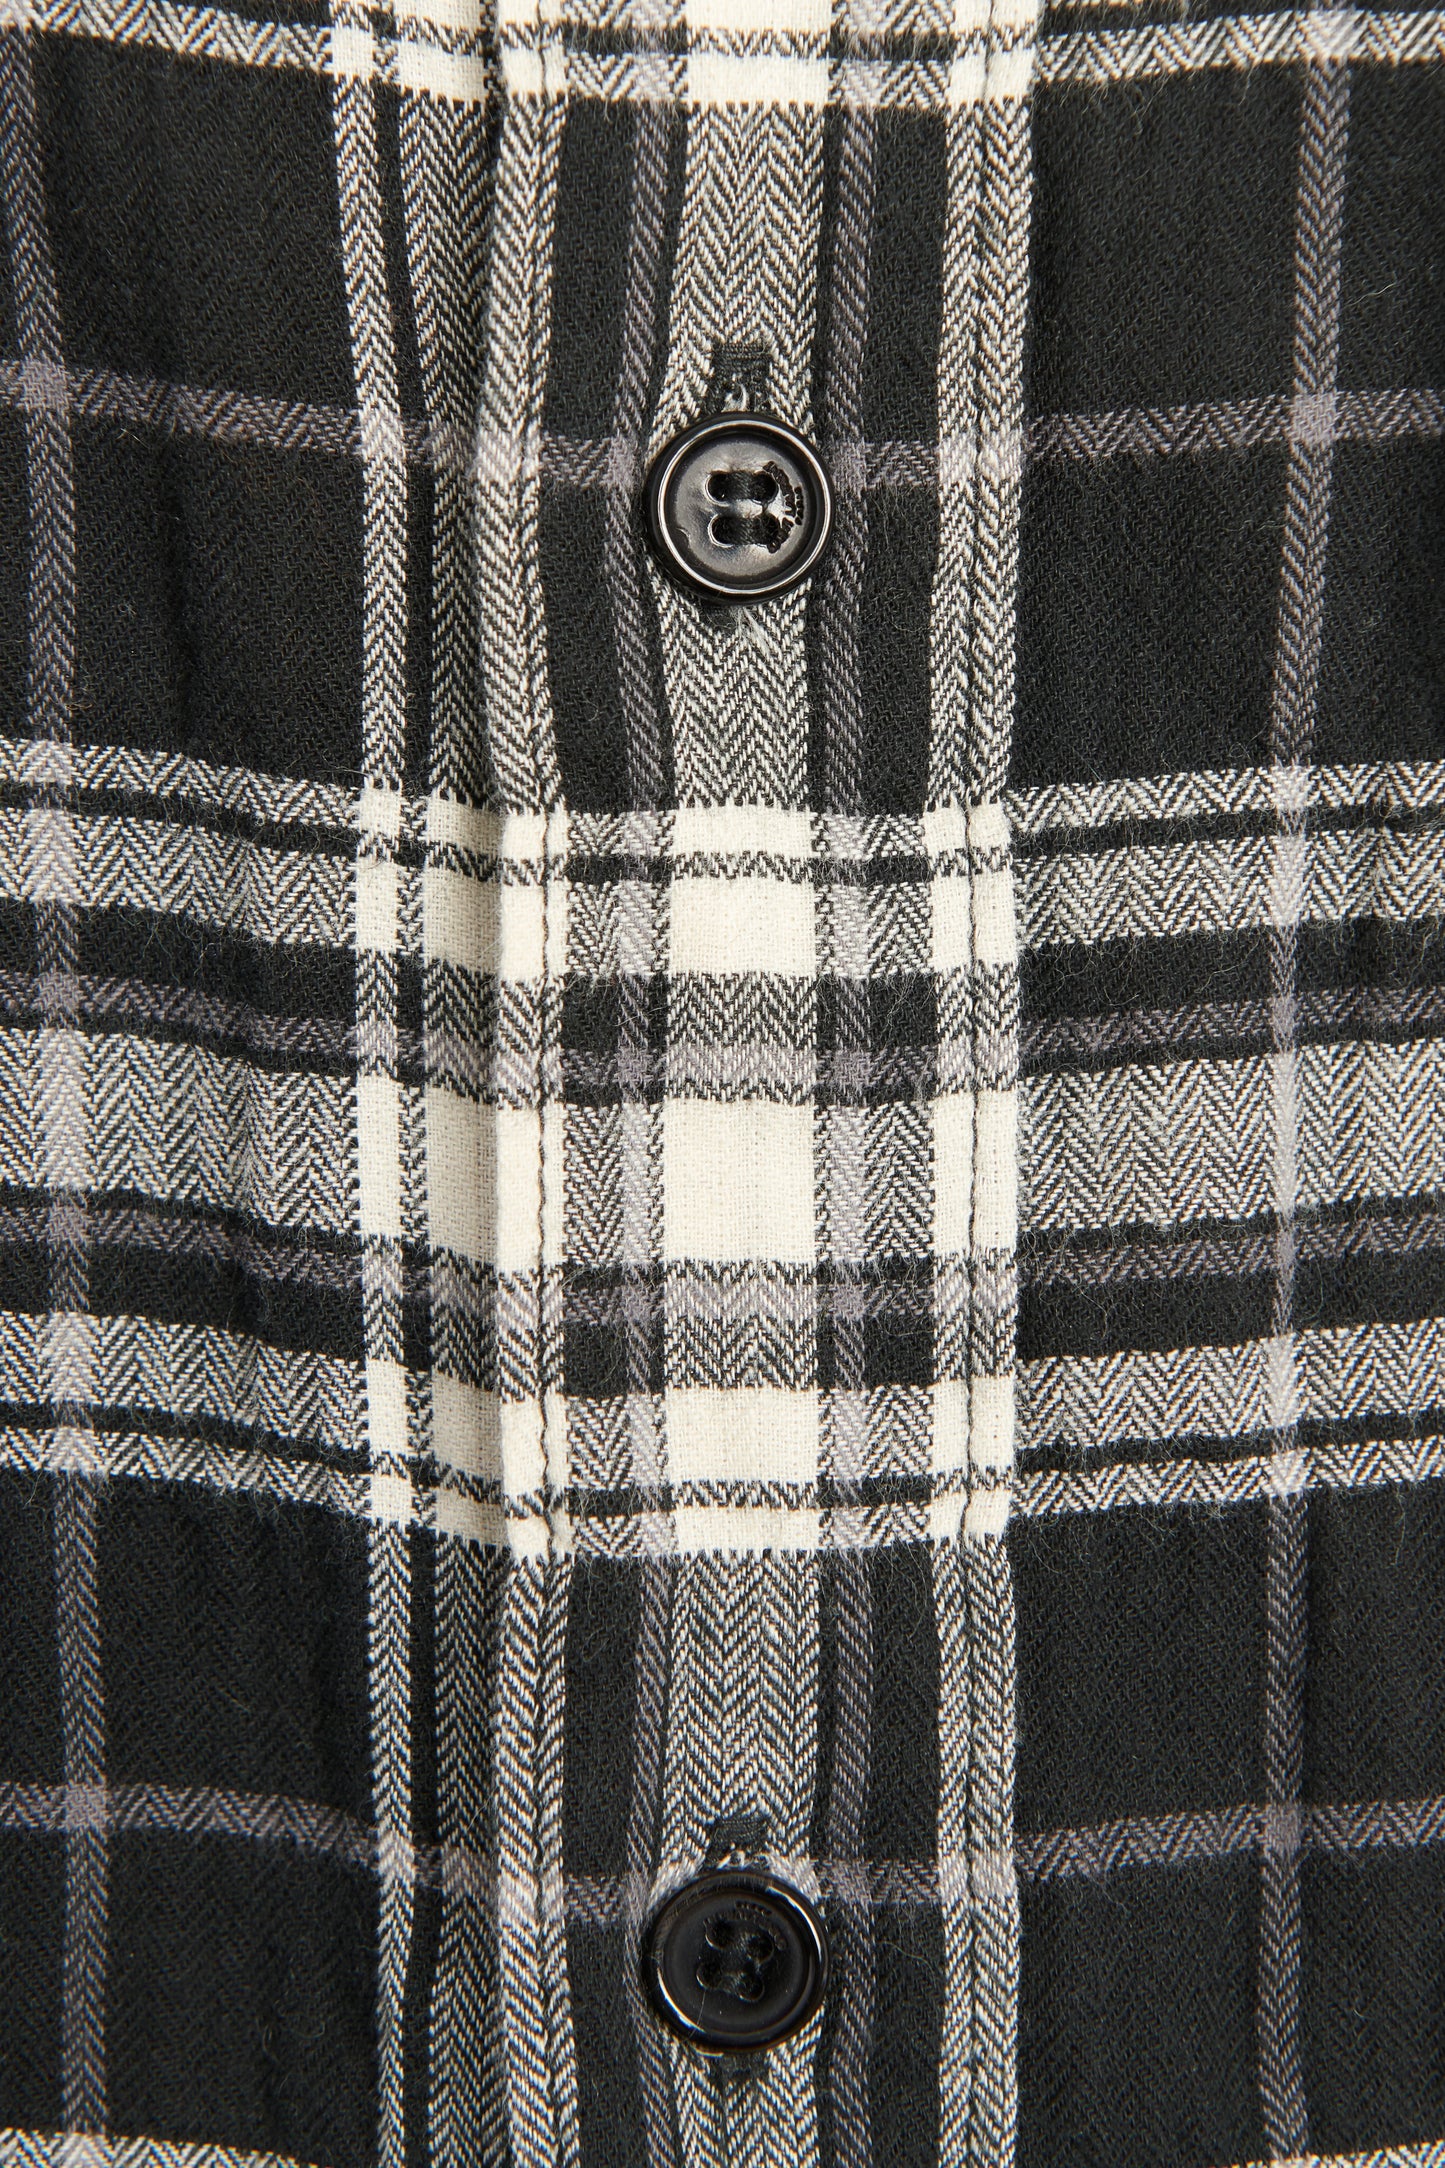 2018 Monochrome Cotton Blend Preowned Check Flannel Shirt